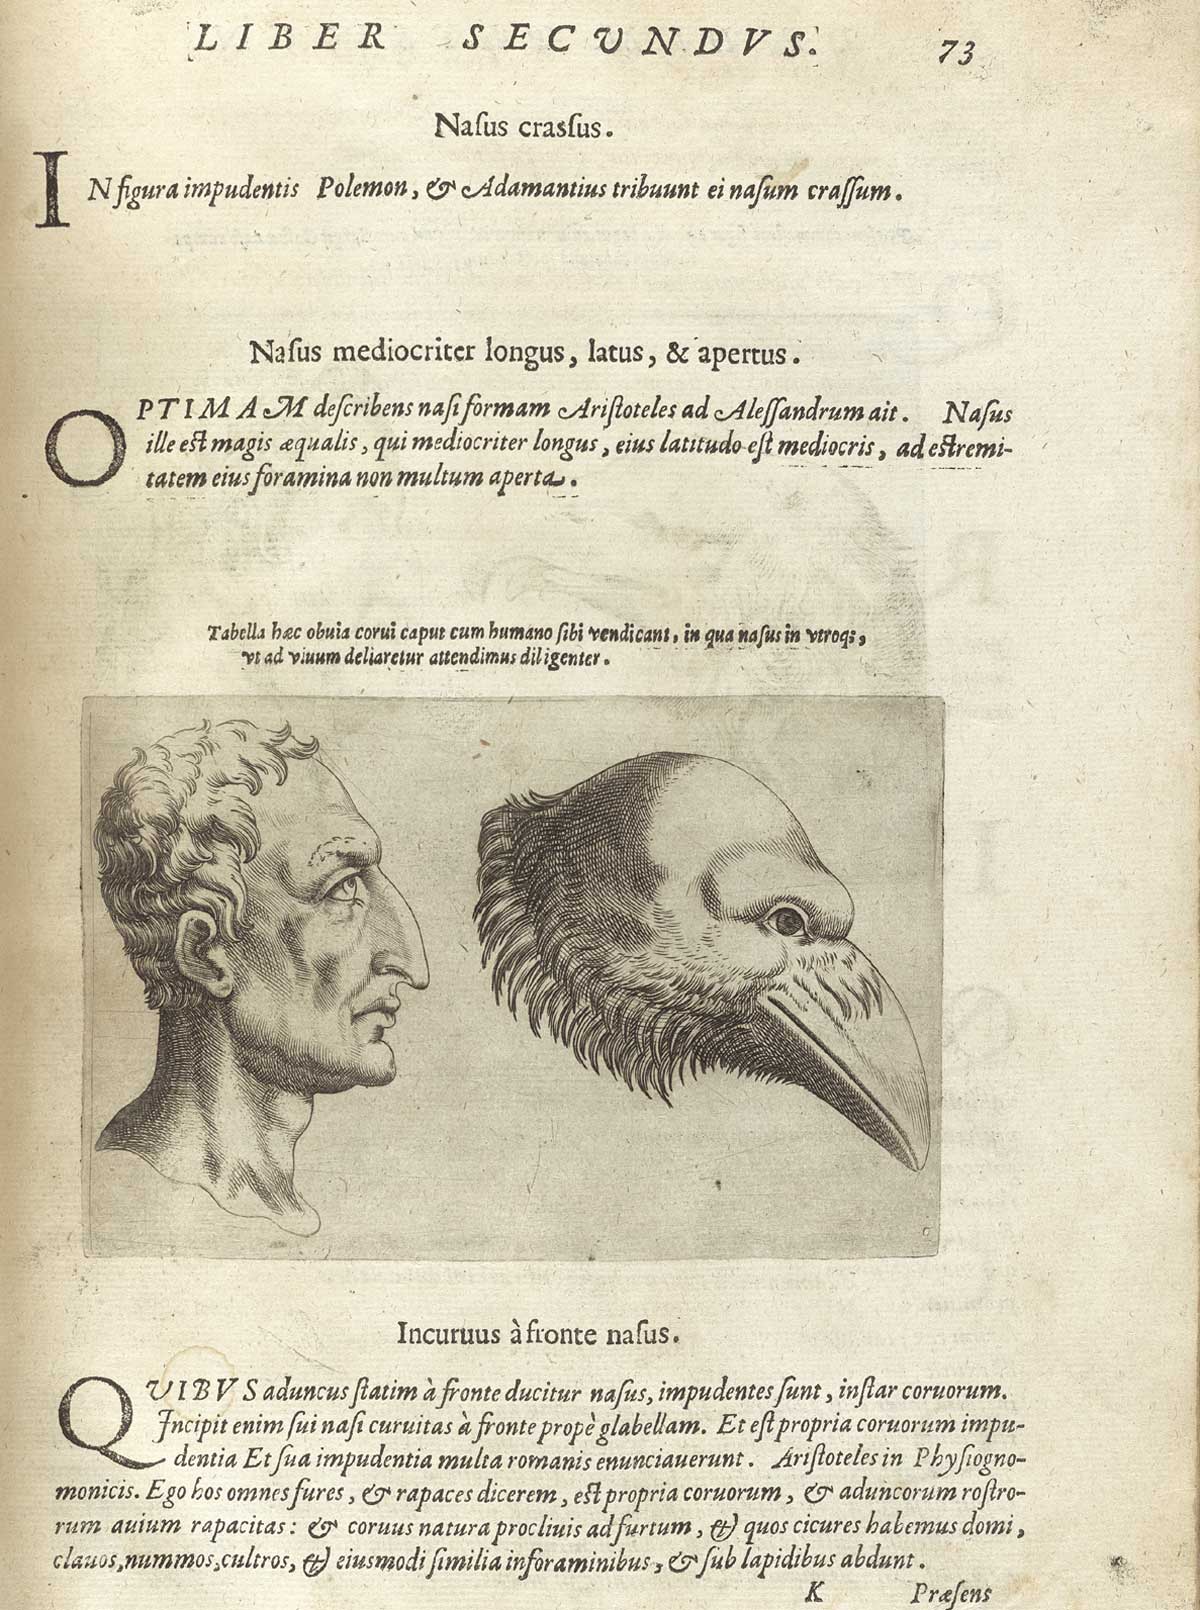 Page 73 of Giambattista della Porta's De humana physiognomonia libri IIII, featuring the head and shoulders right side view of a man with a large hooked nose and a crow.